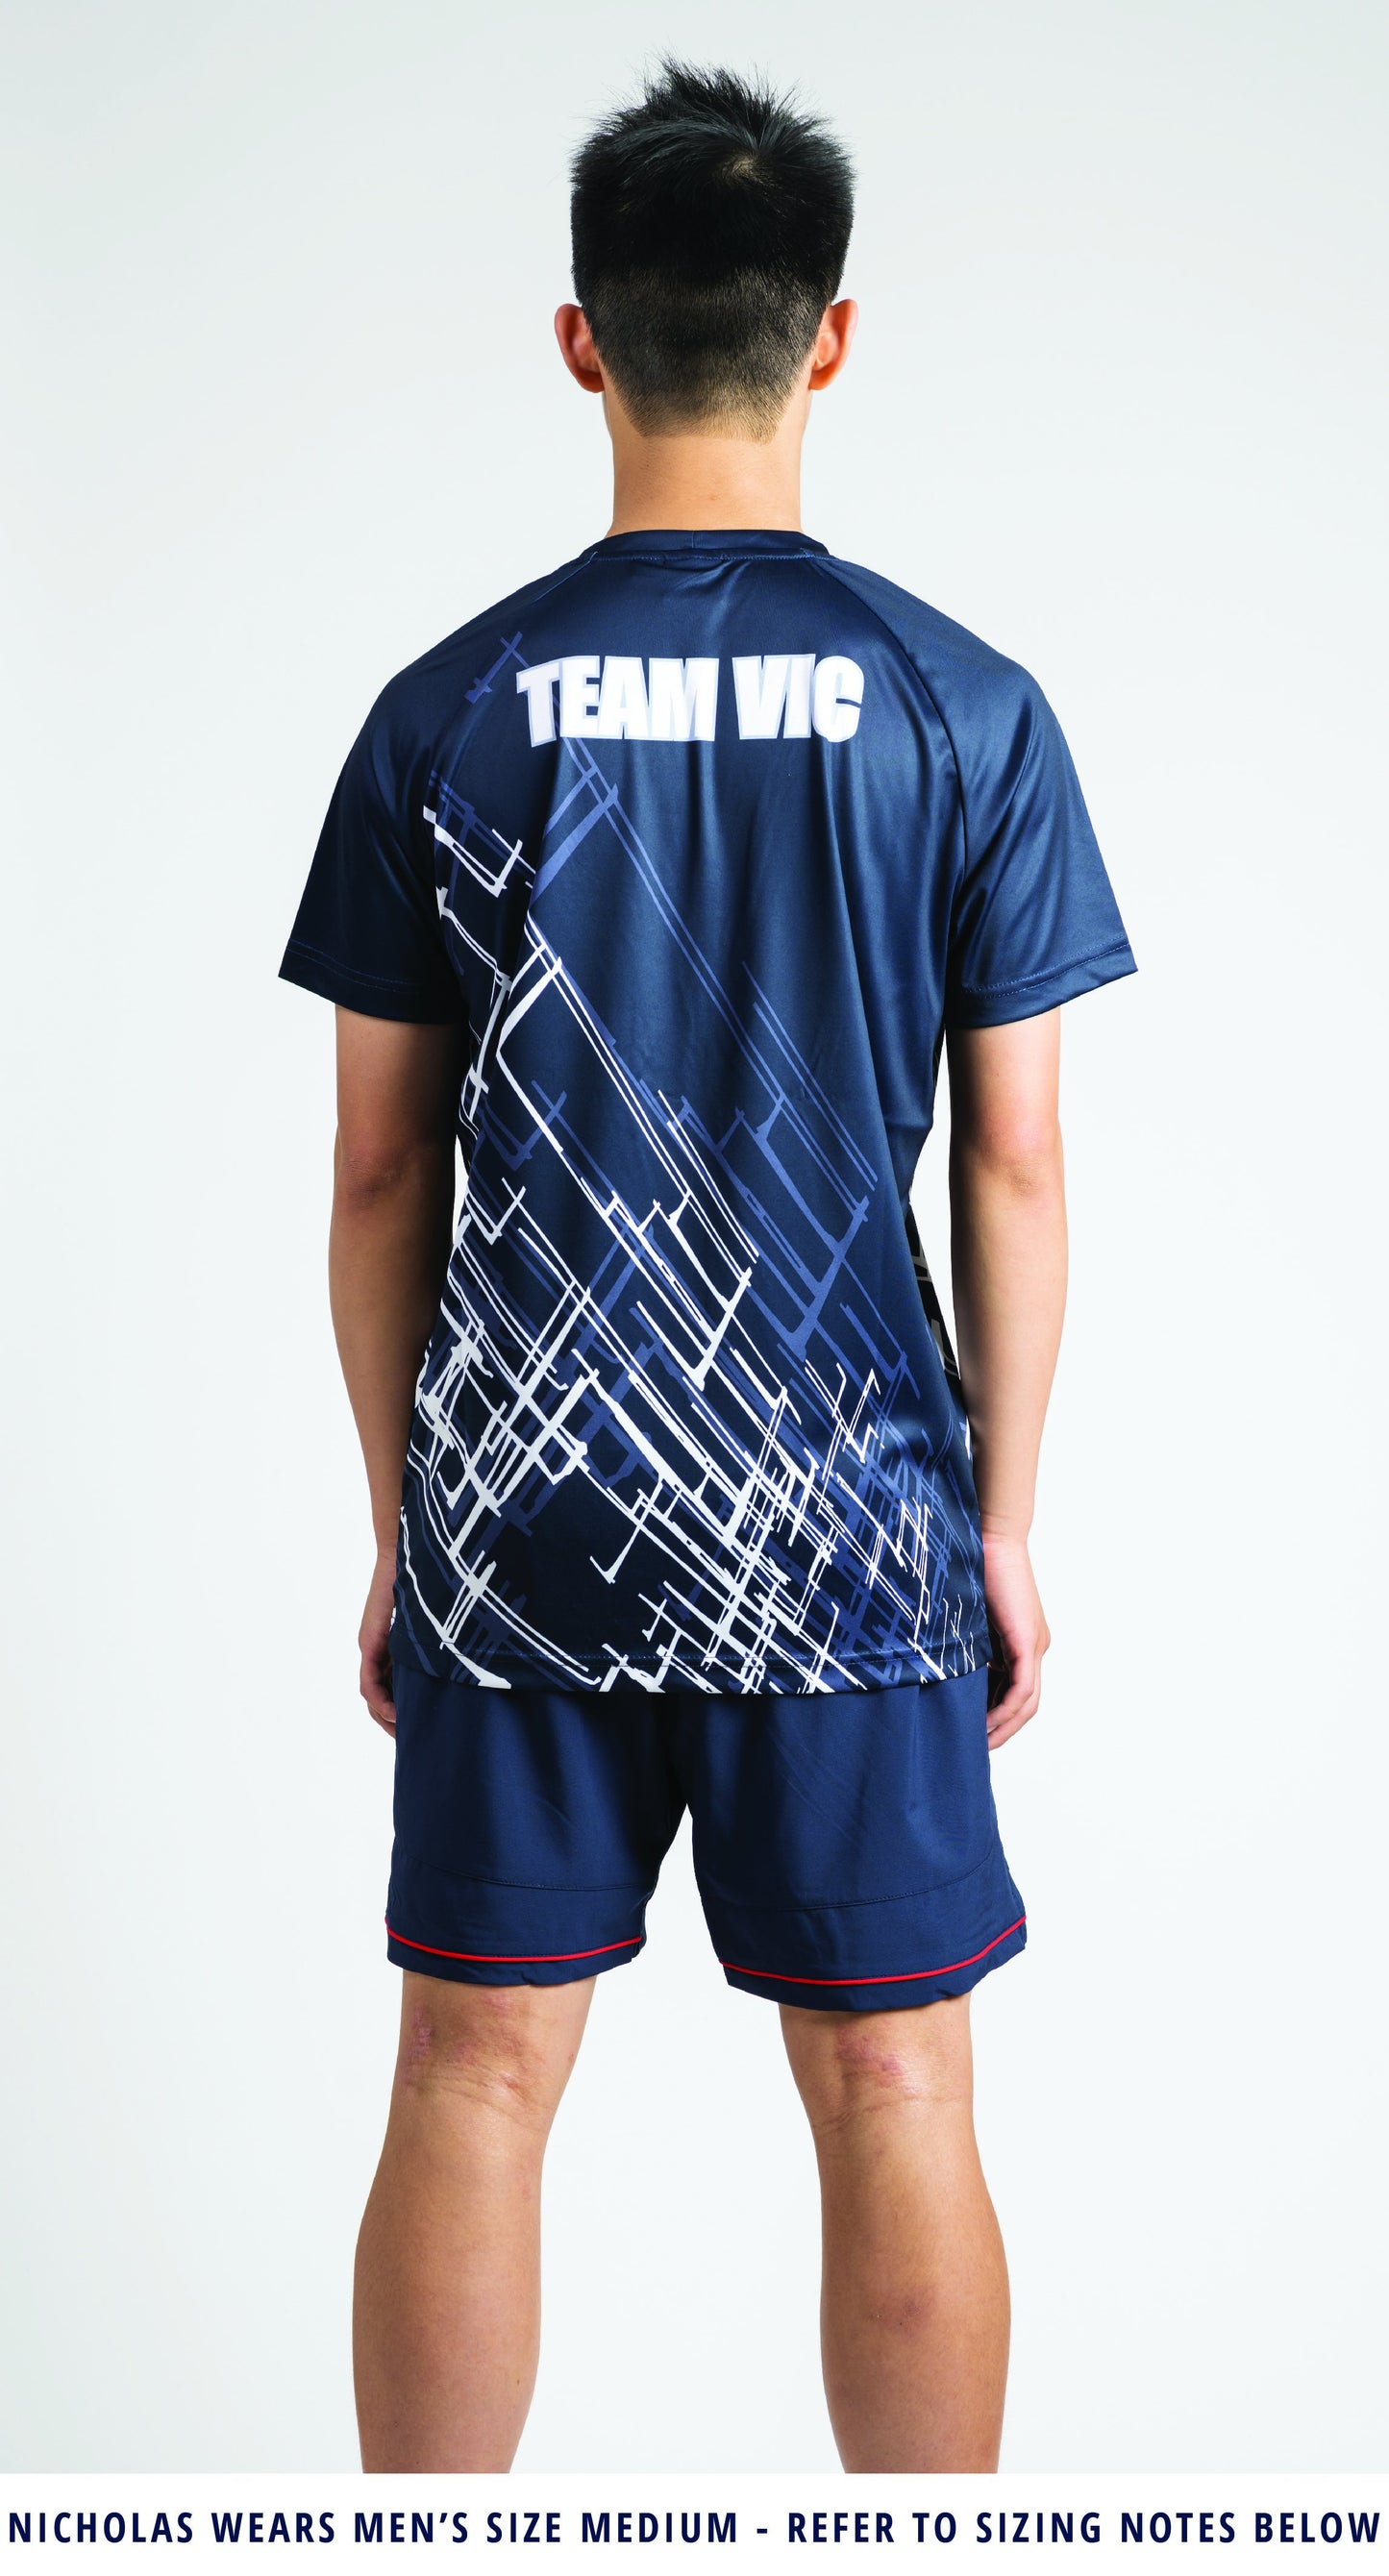 Male Team Vic Warm Up Top